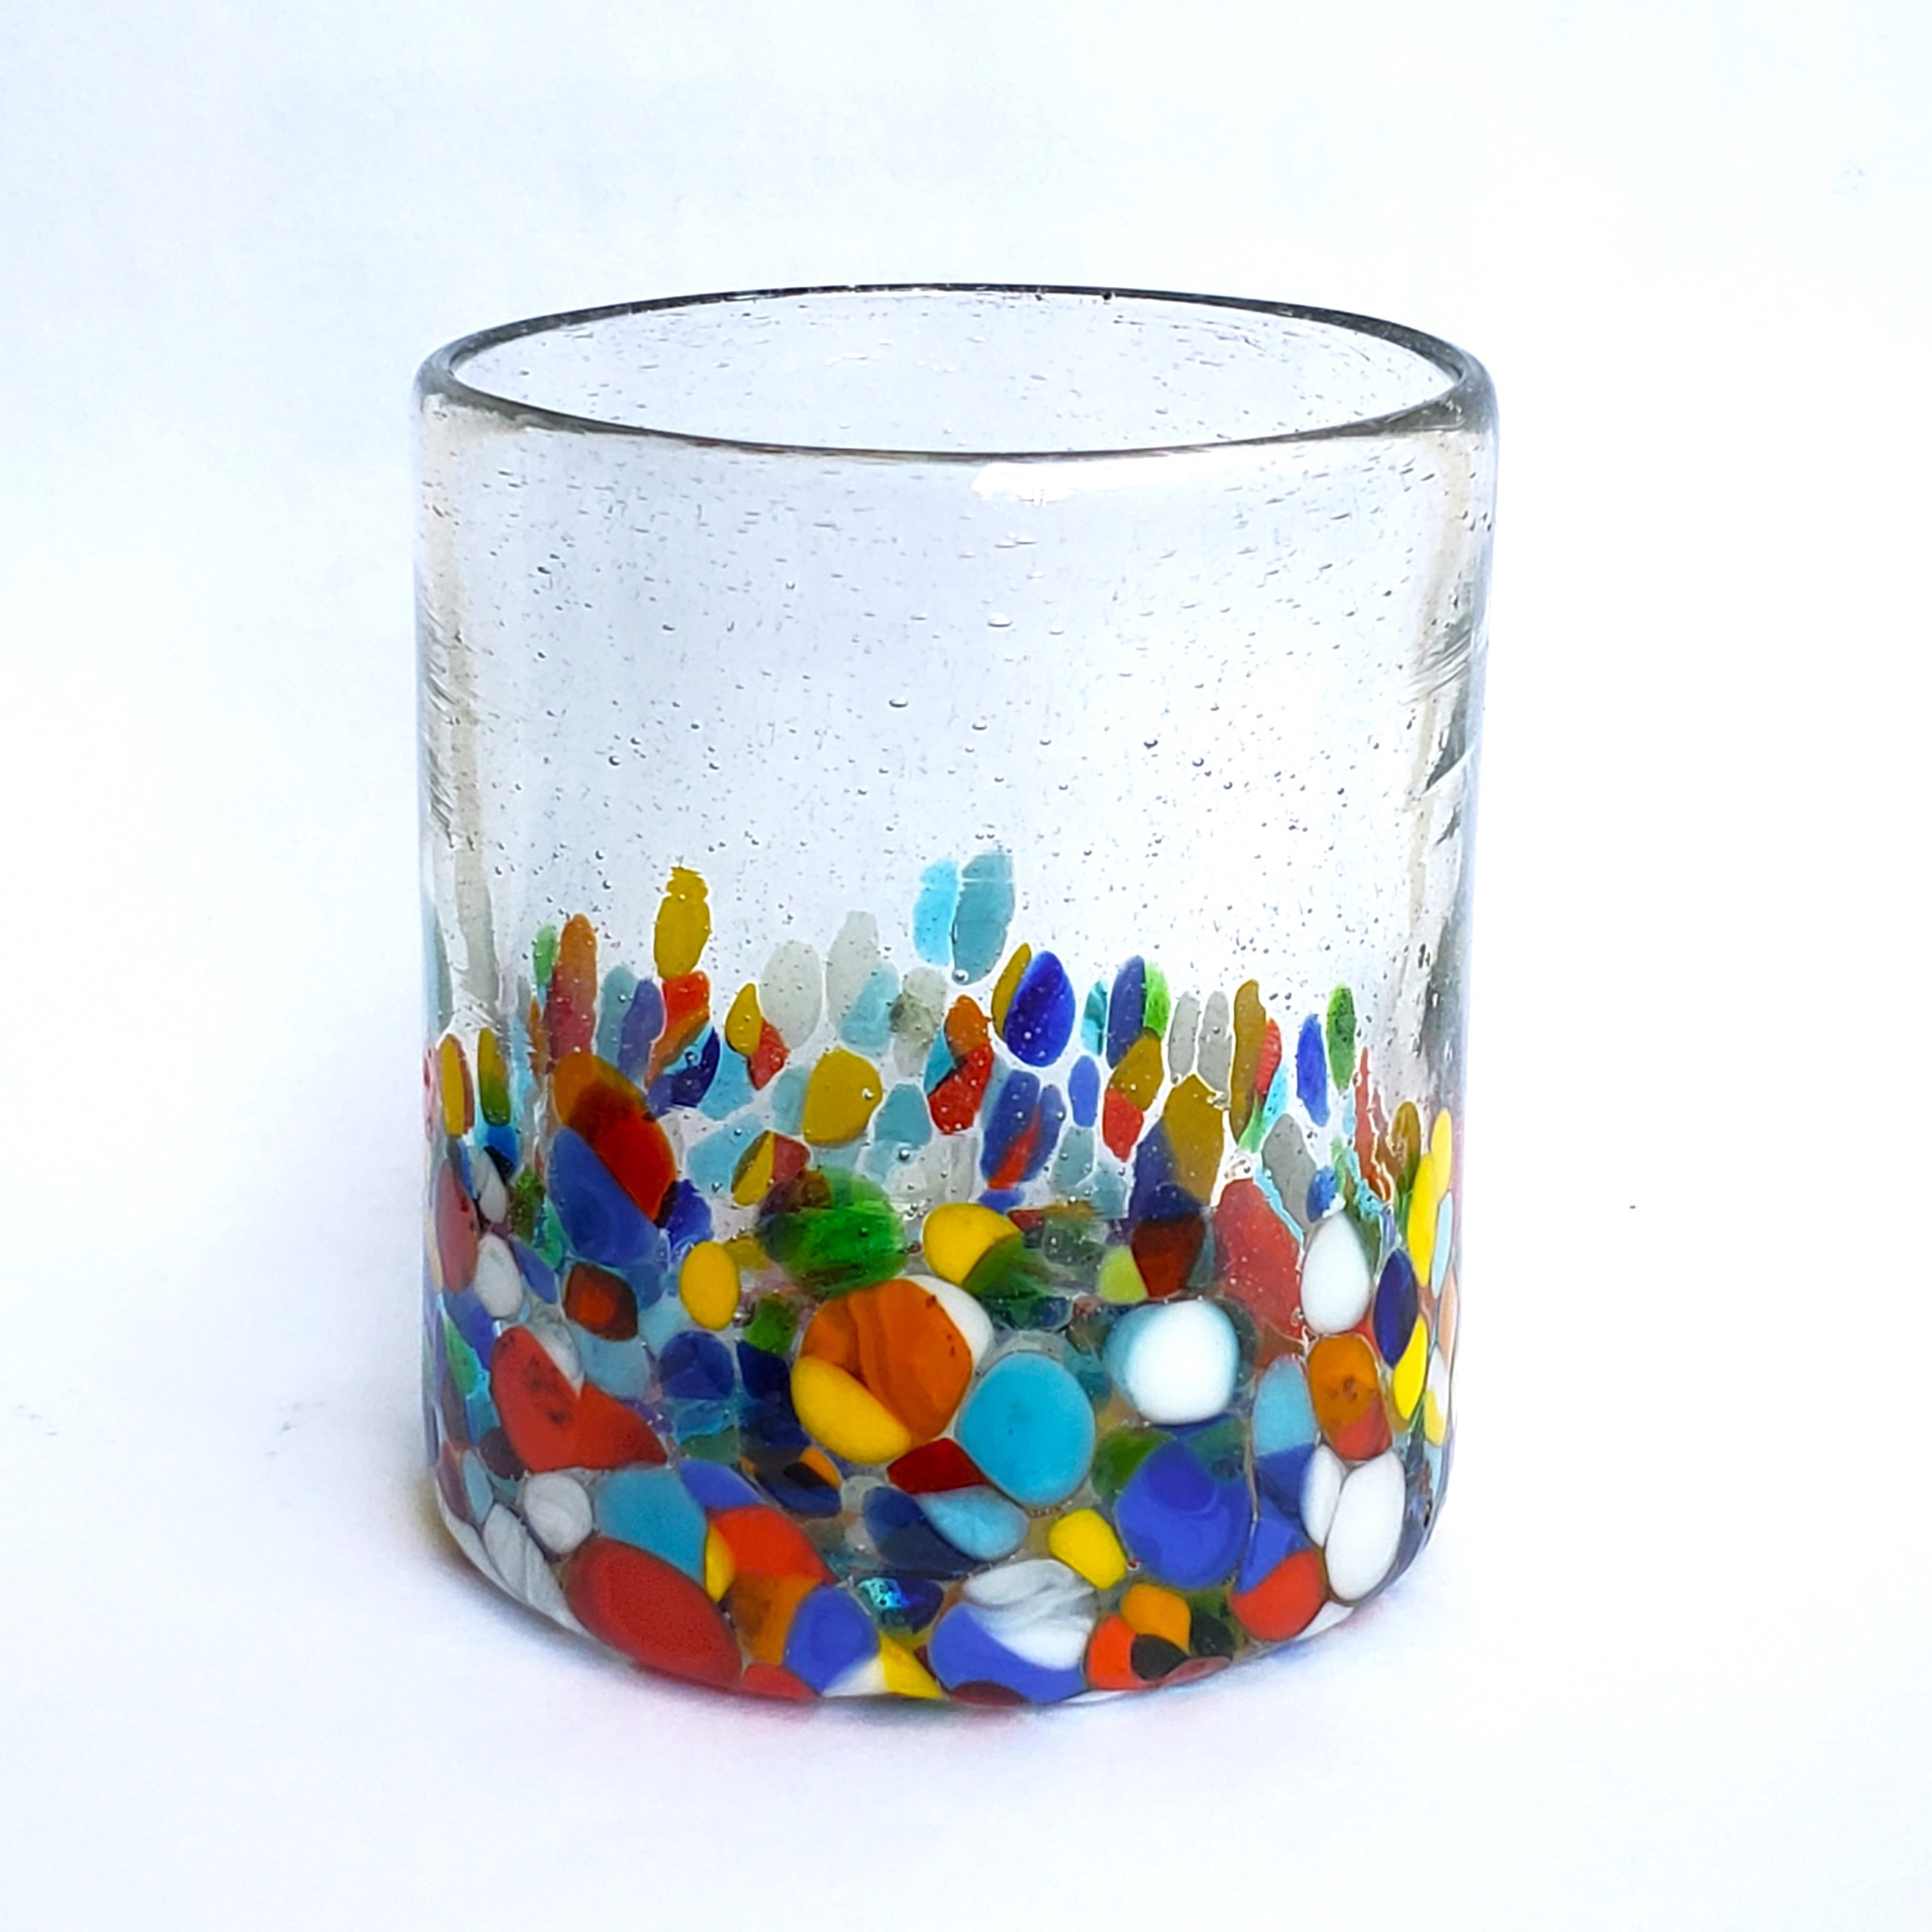 New Items / Clear & Confetti 9 oz Short Tumblers  / Our Clear & Confetti Glassware combines  the best of two worlds: clear, thick, sturdy handcrafted glass on top, meets the colorful, festive, confetti bottom! These glasses will sure be a standout in any table setting or as a fabulous gift for your loved ones. Crafted one by one by skilled artisans in Tonala, Mexico, each glass is different from the next making them unique works of art. You'll be amazed at how they make having a simple glass of water a happier experience. Made from eco-friendly recycled glass.